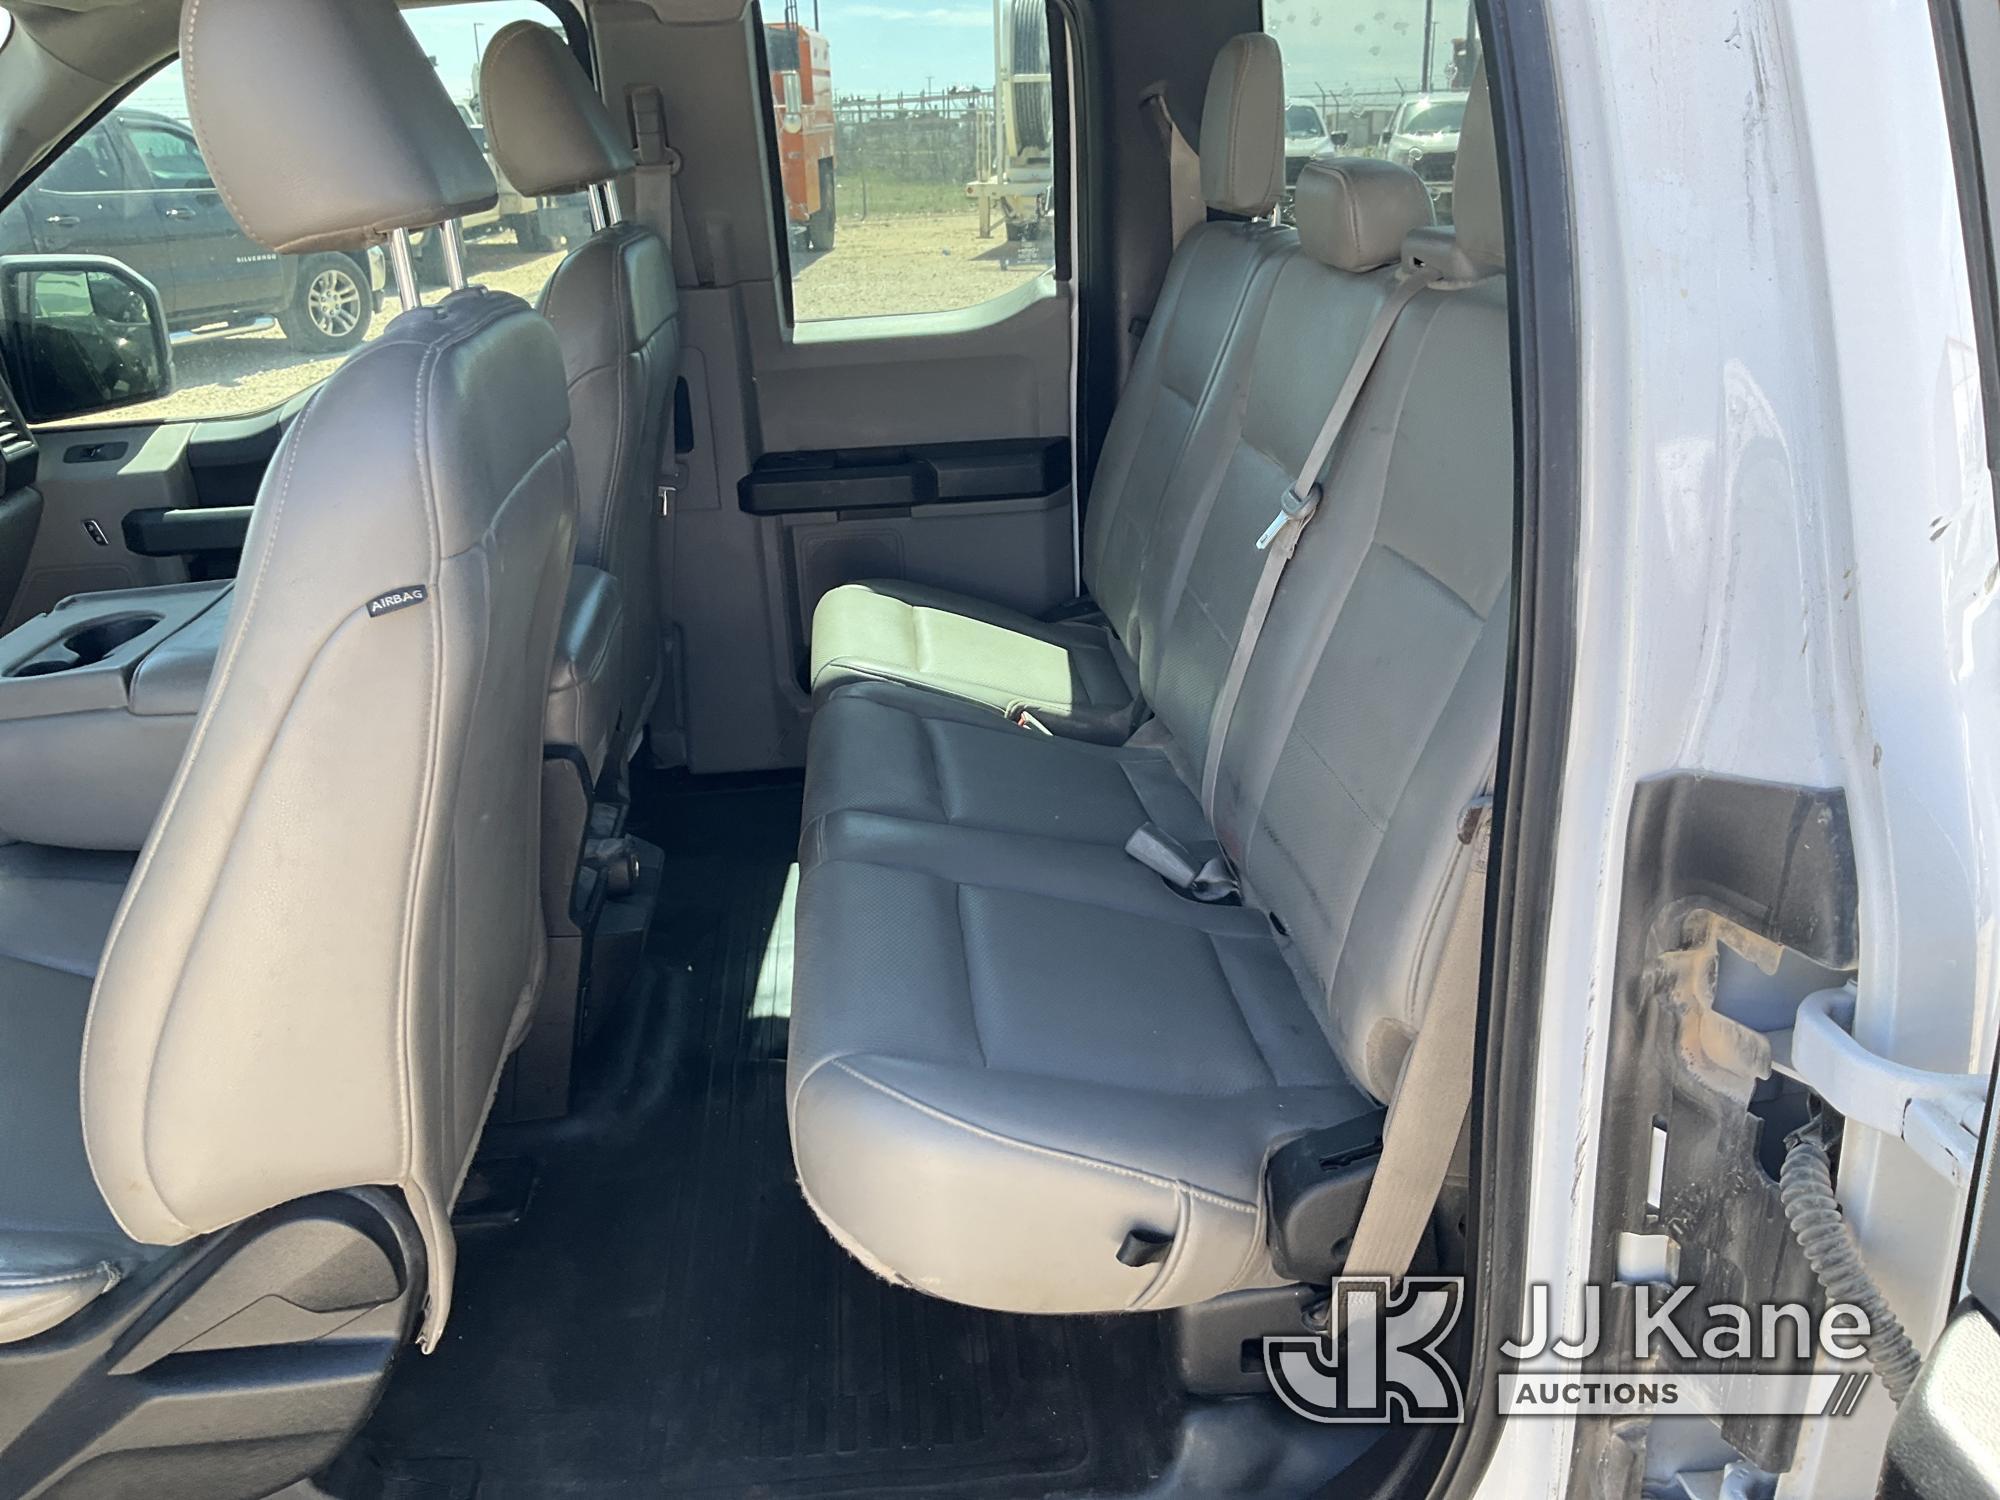 (Odessa, TX) 2019 Ford F150 4x4 Extended-Cab Pickup Truck Runs & Drives) (Minor Paint And Body Damag